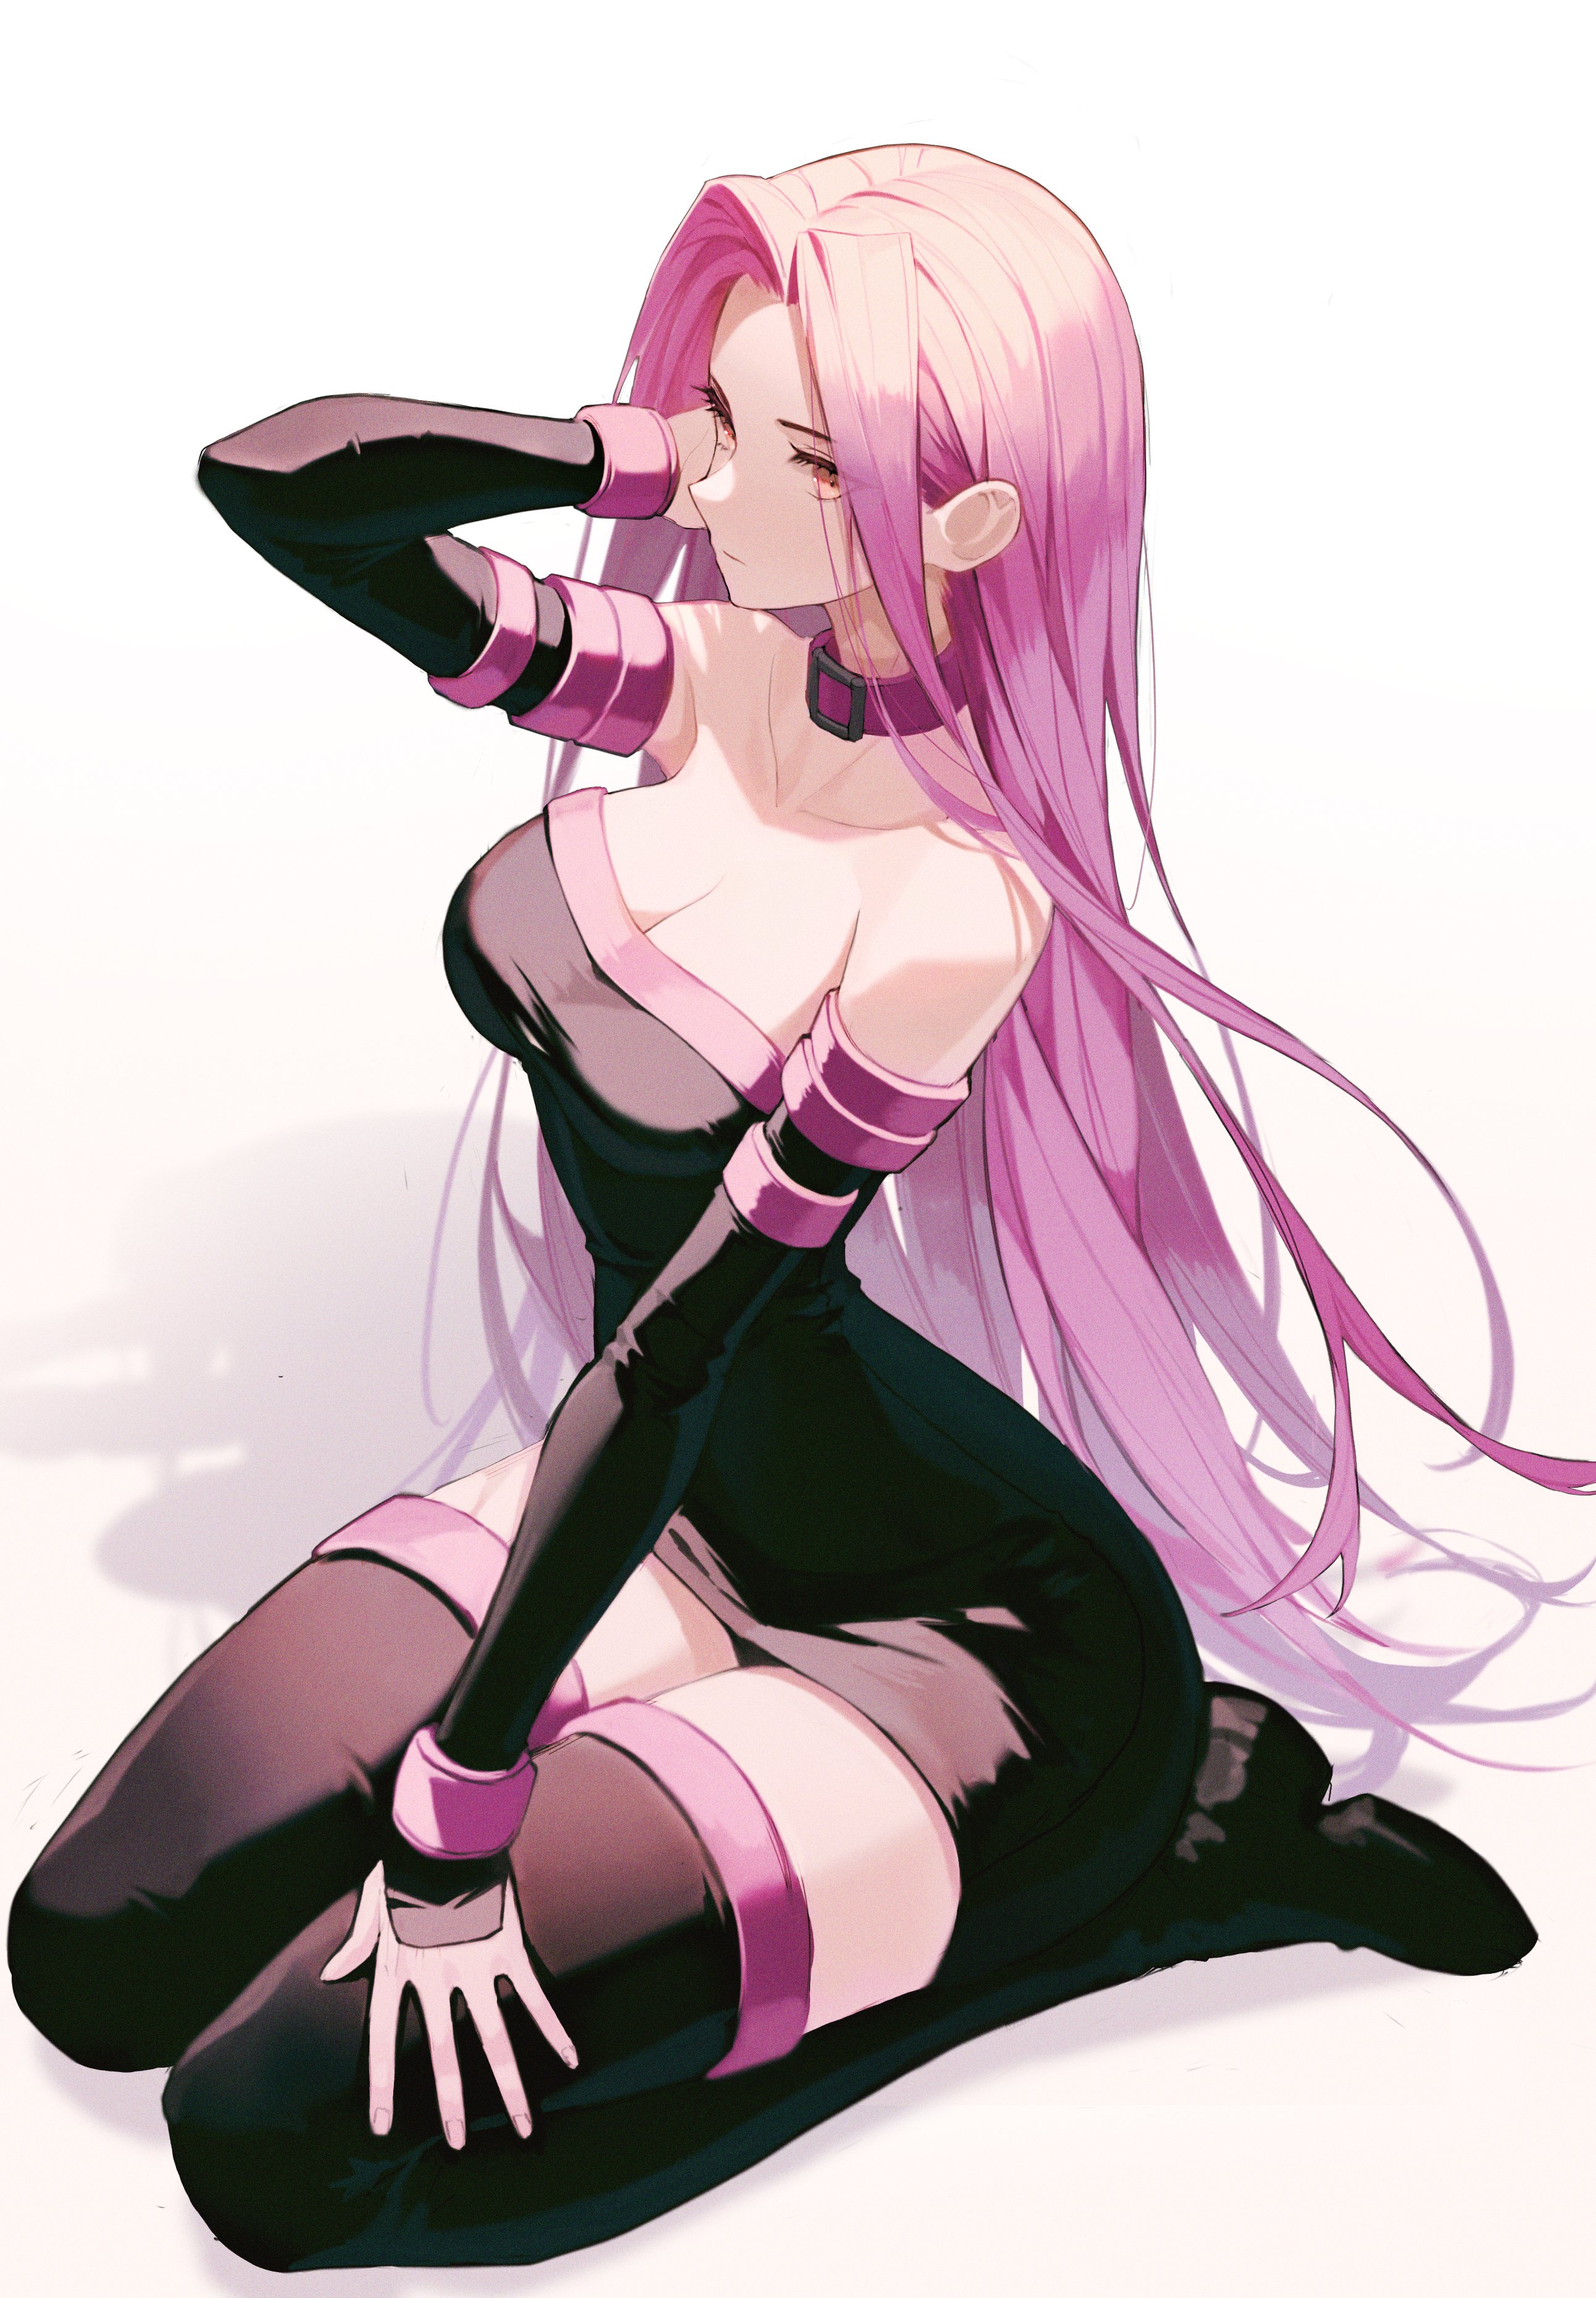 Anime 2585x3722 Fate series Fate/Stay Night anime girls cleavage ecchi black dress long hair purple hair no bra big boobs thighs curvy touching hair thick thigh Rider (Fate/Stay Night) Medusa (Fate/Grand Order) simple background 2D pink eyes portrait display thigh high boots black boots Pro-p fan art anime